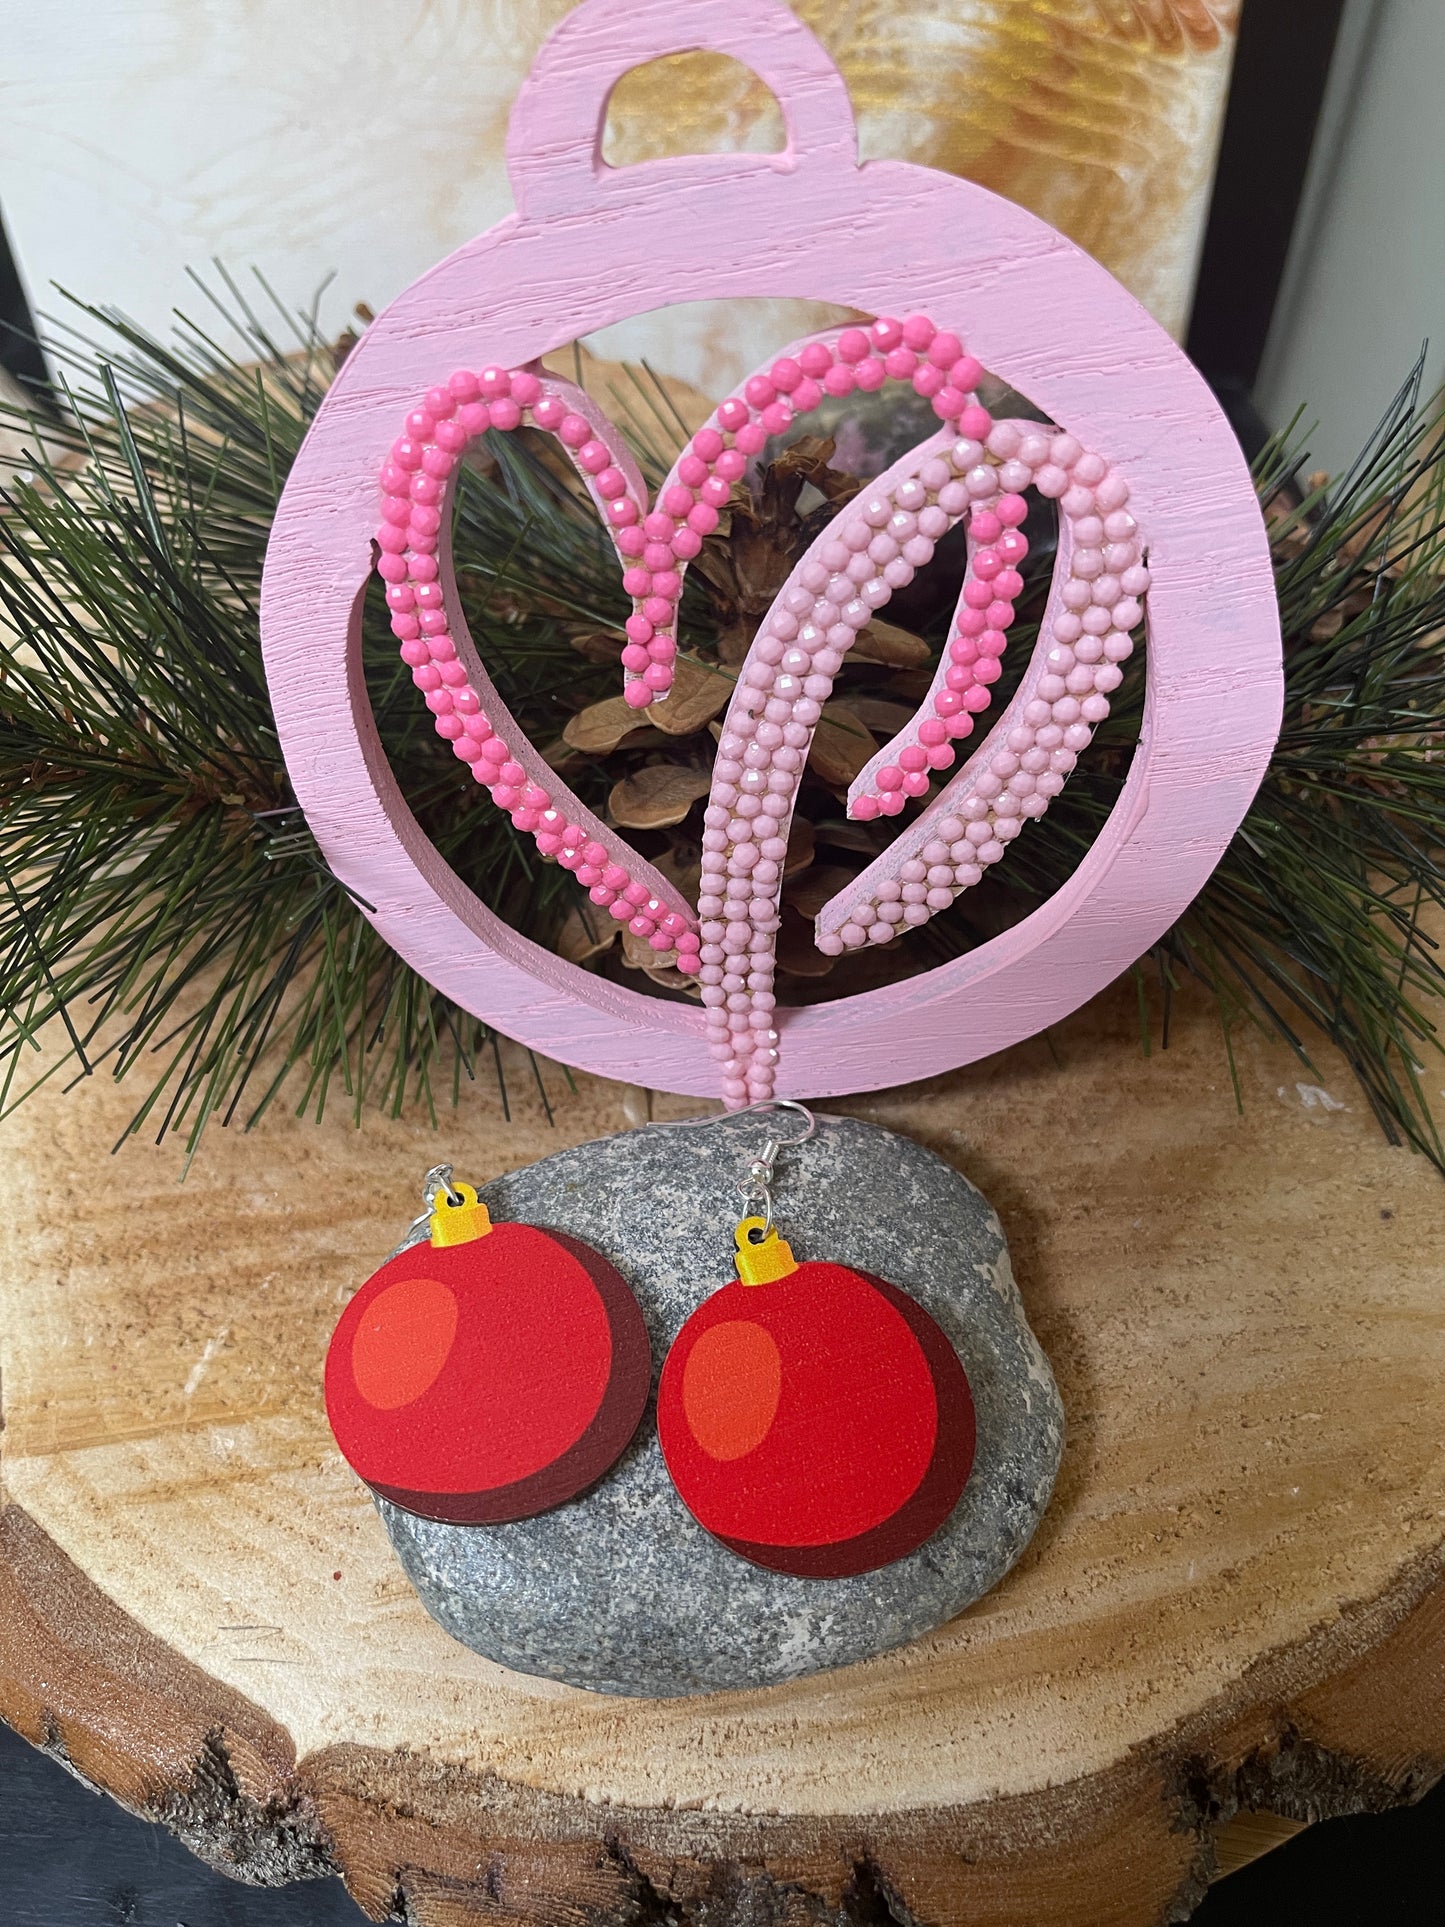 Wooden Christmas Ornament Wire Earrings